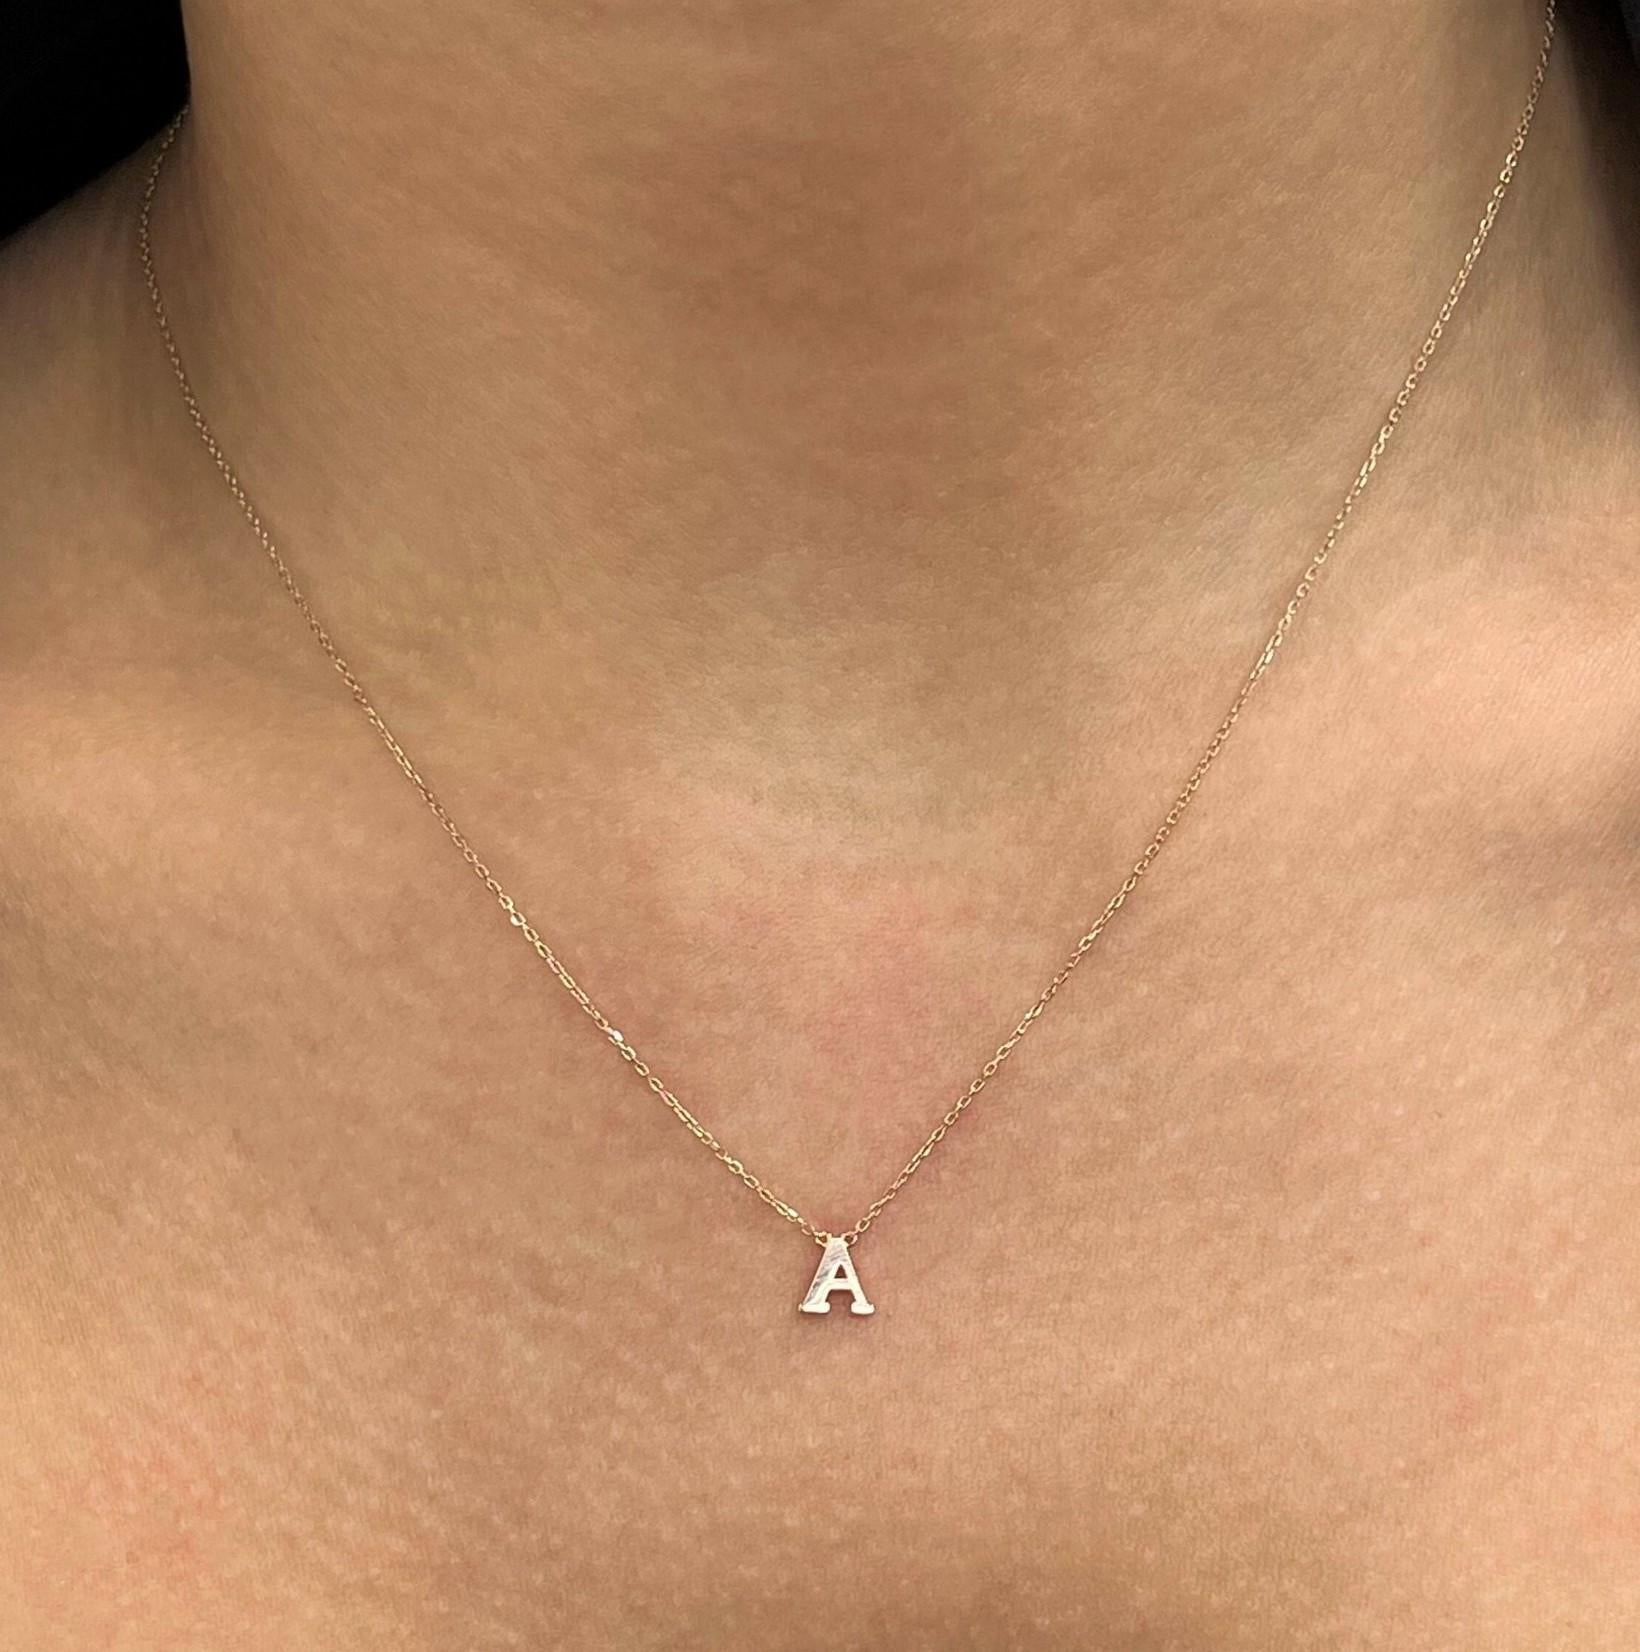 Rachel Koen Small 'A' Initial Letter Pendant Chain Necklace 14K Rose Gold In New Condition For Sale In New York, NY